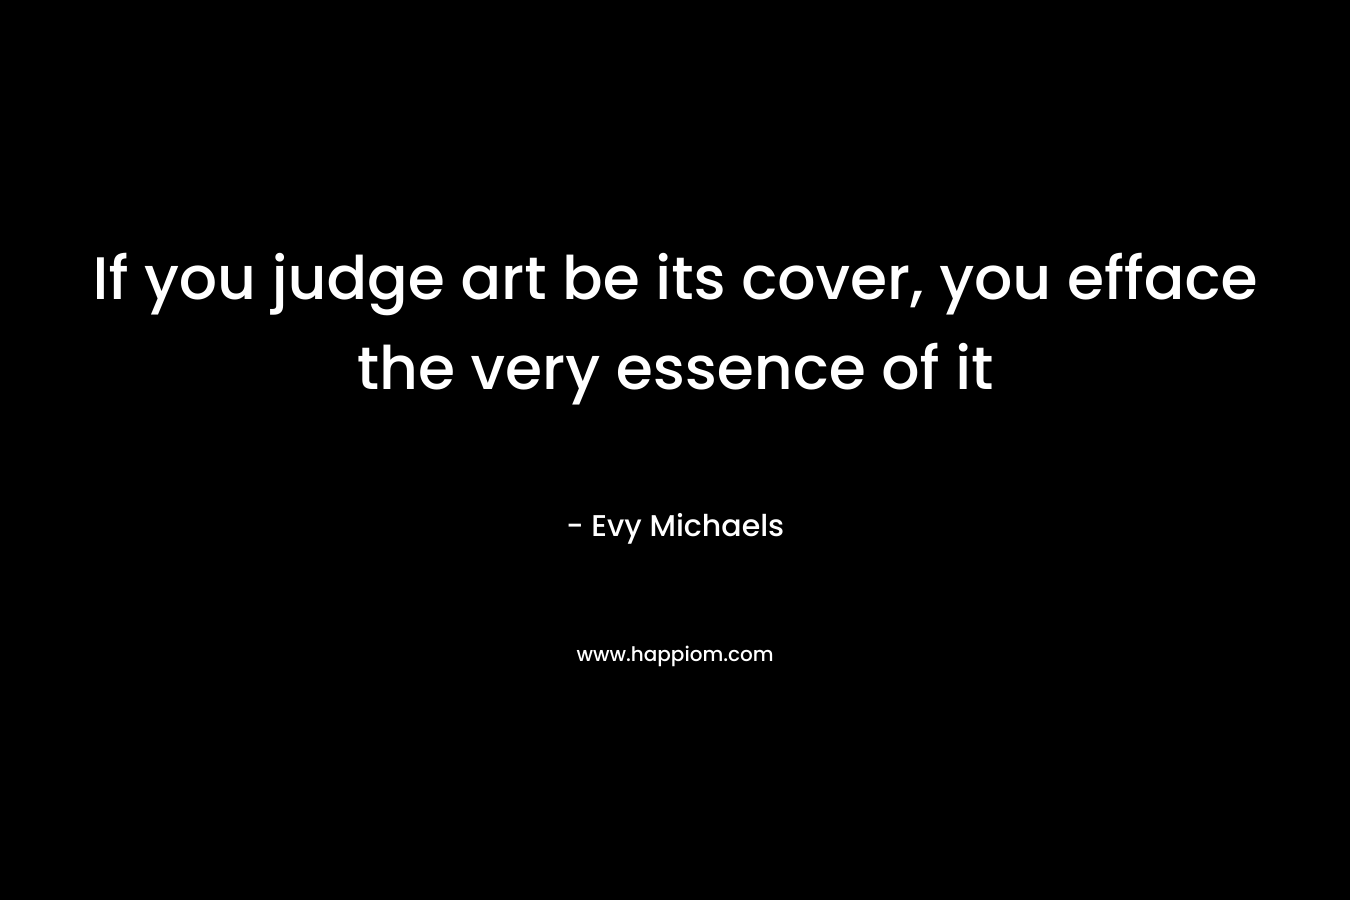 If you judge art be its cover, you efface the very essence of it